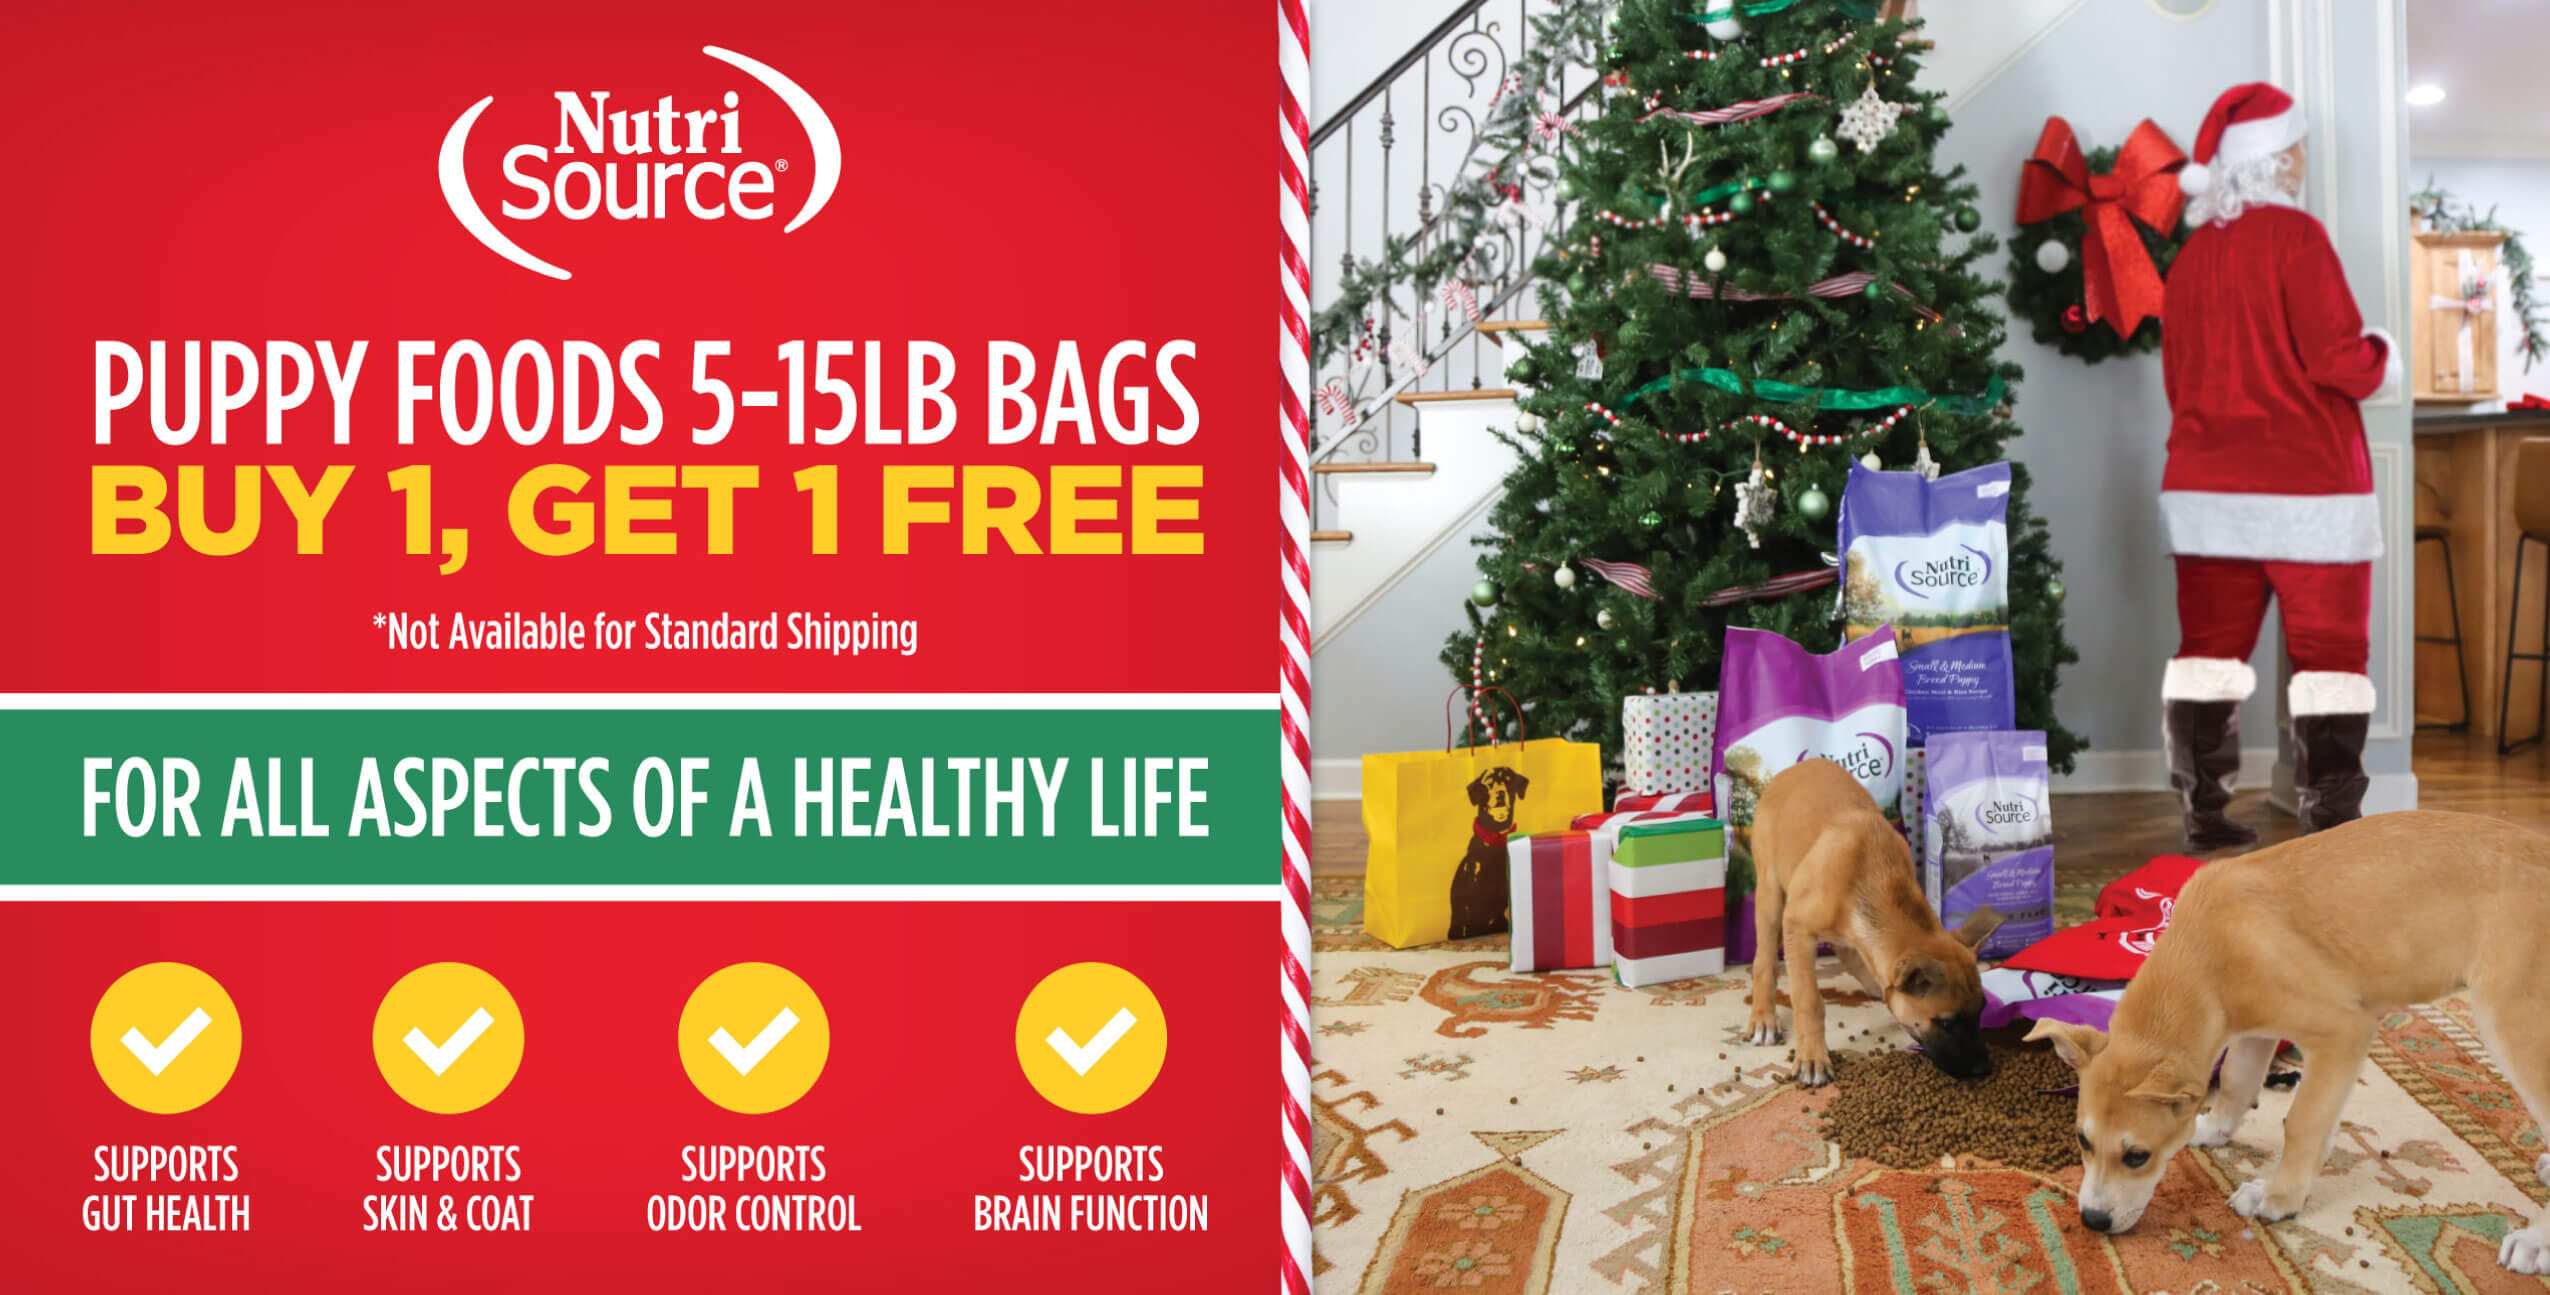 Buy 1, Get 1 Free NutriSource Puppy Foods 5-15LB Bags